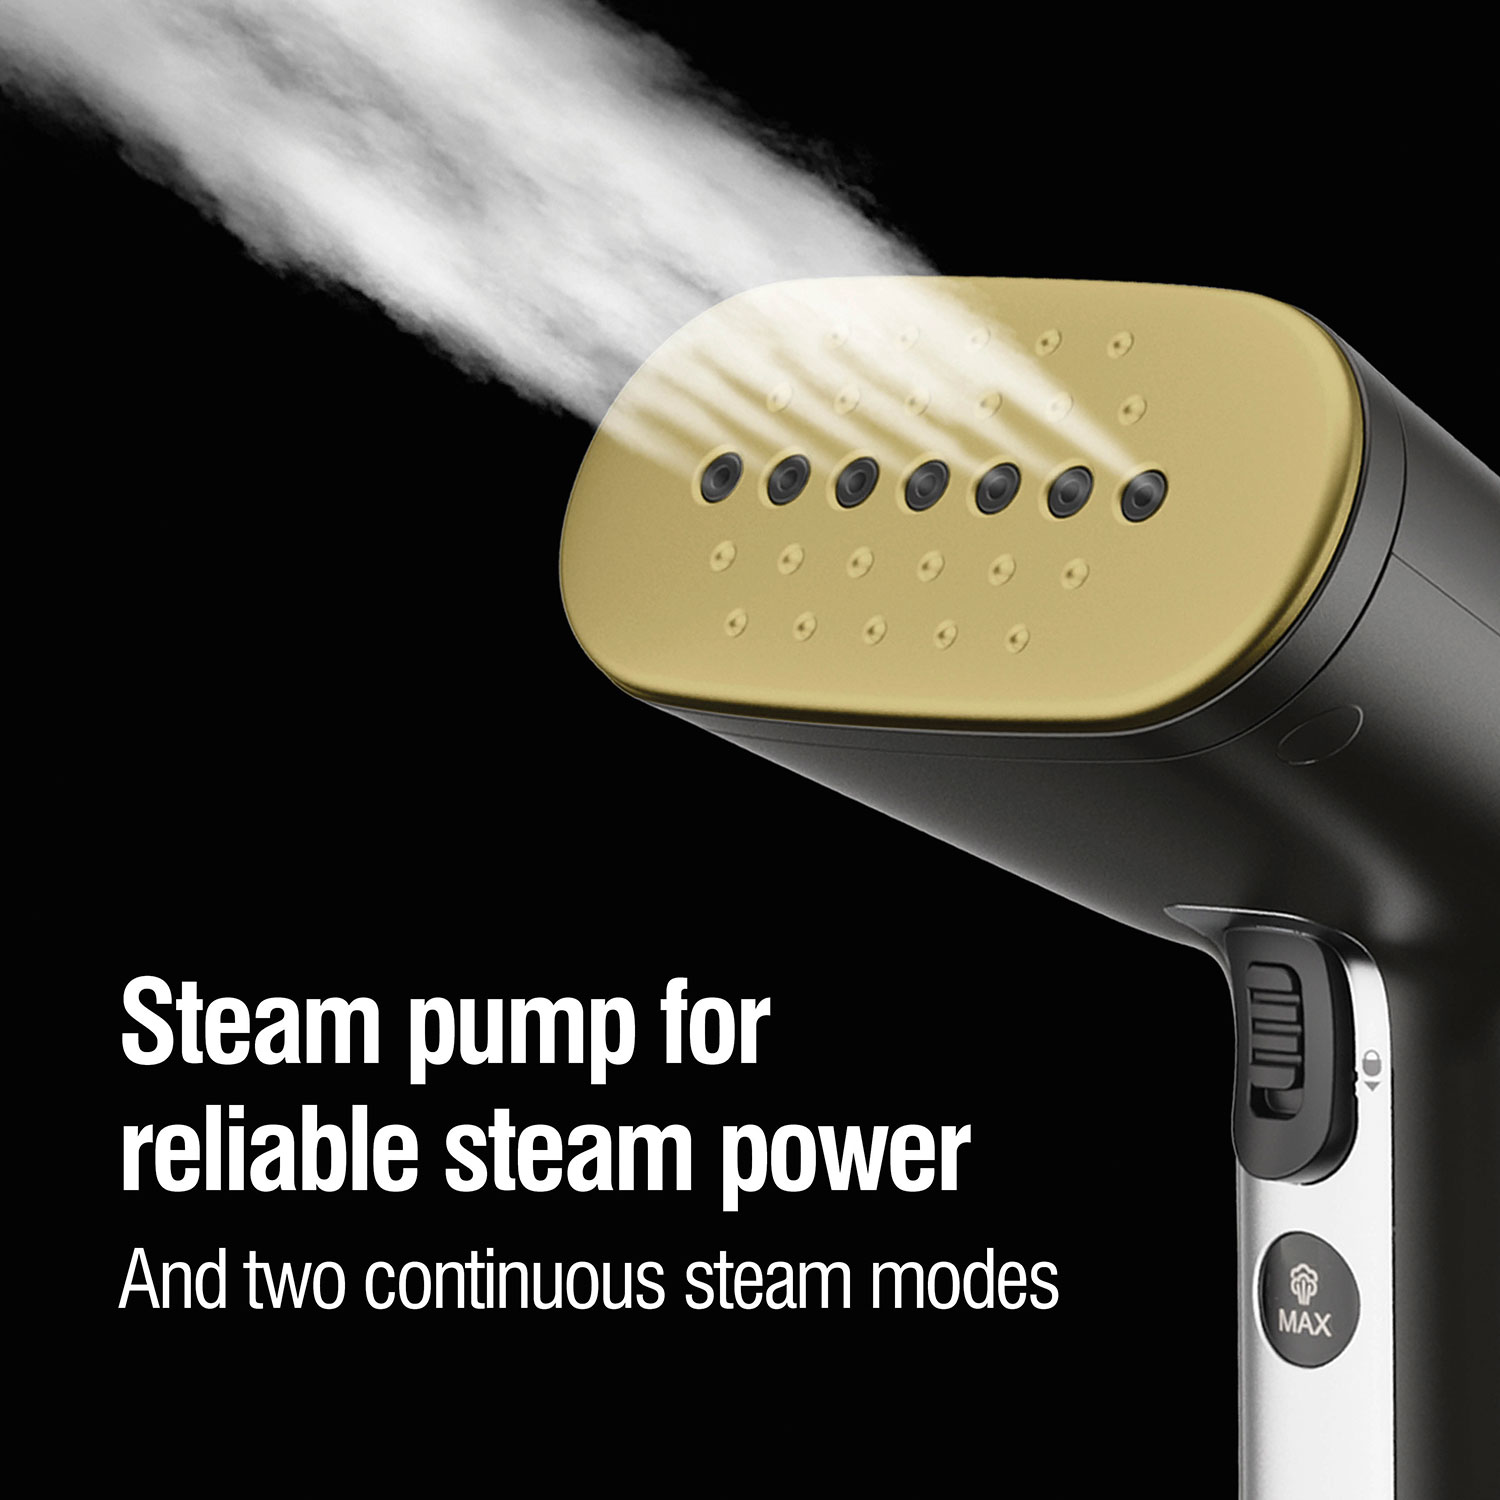 Steam pump for reliable steam power and two continuous steam modes